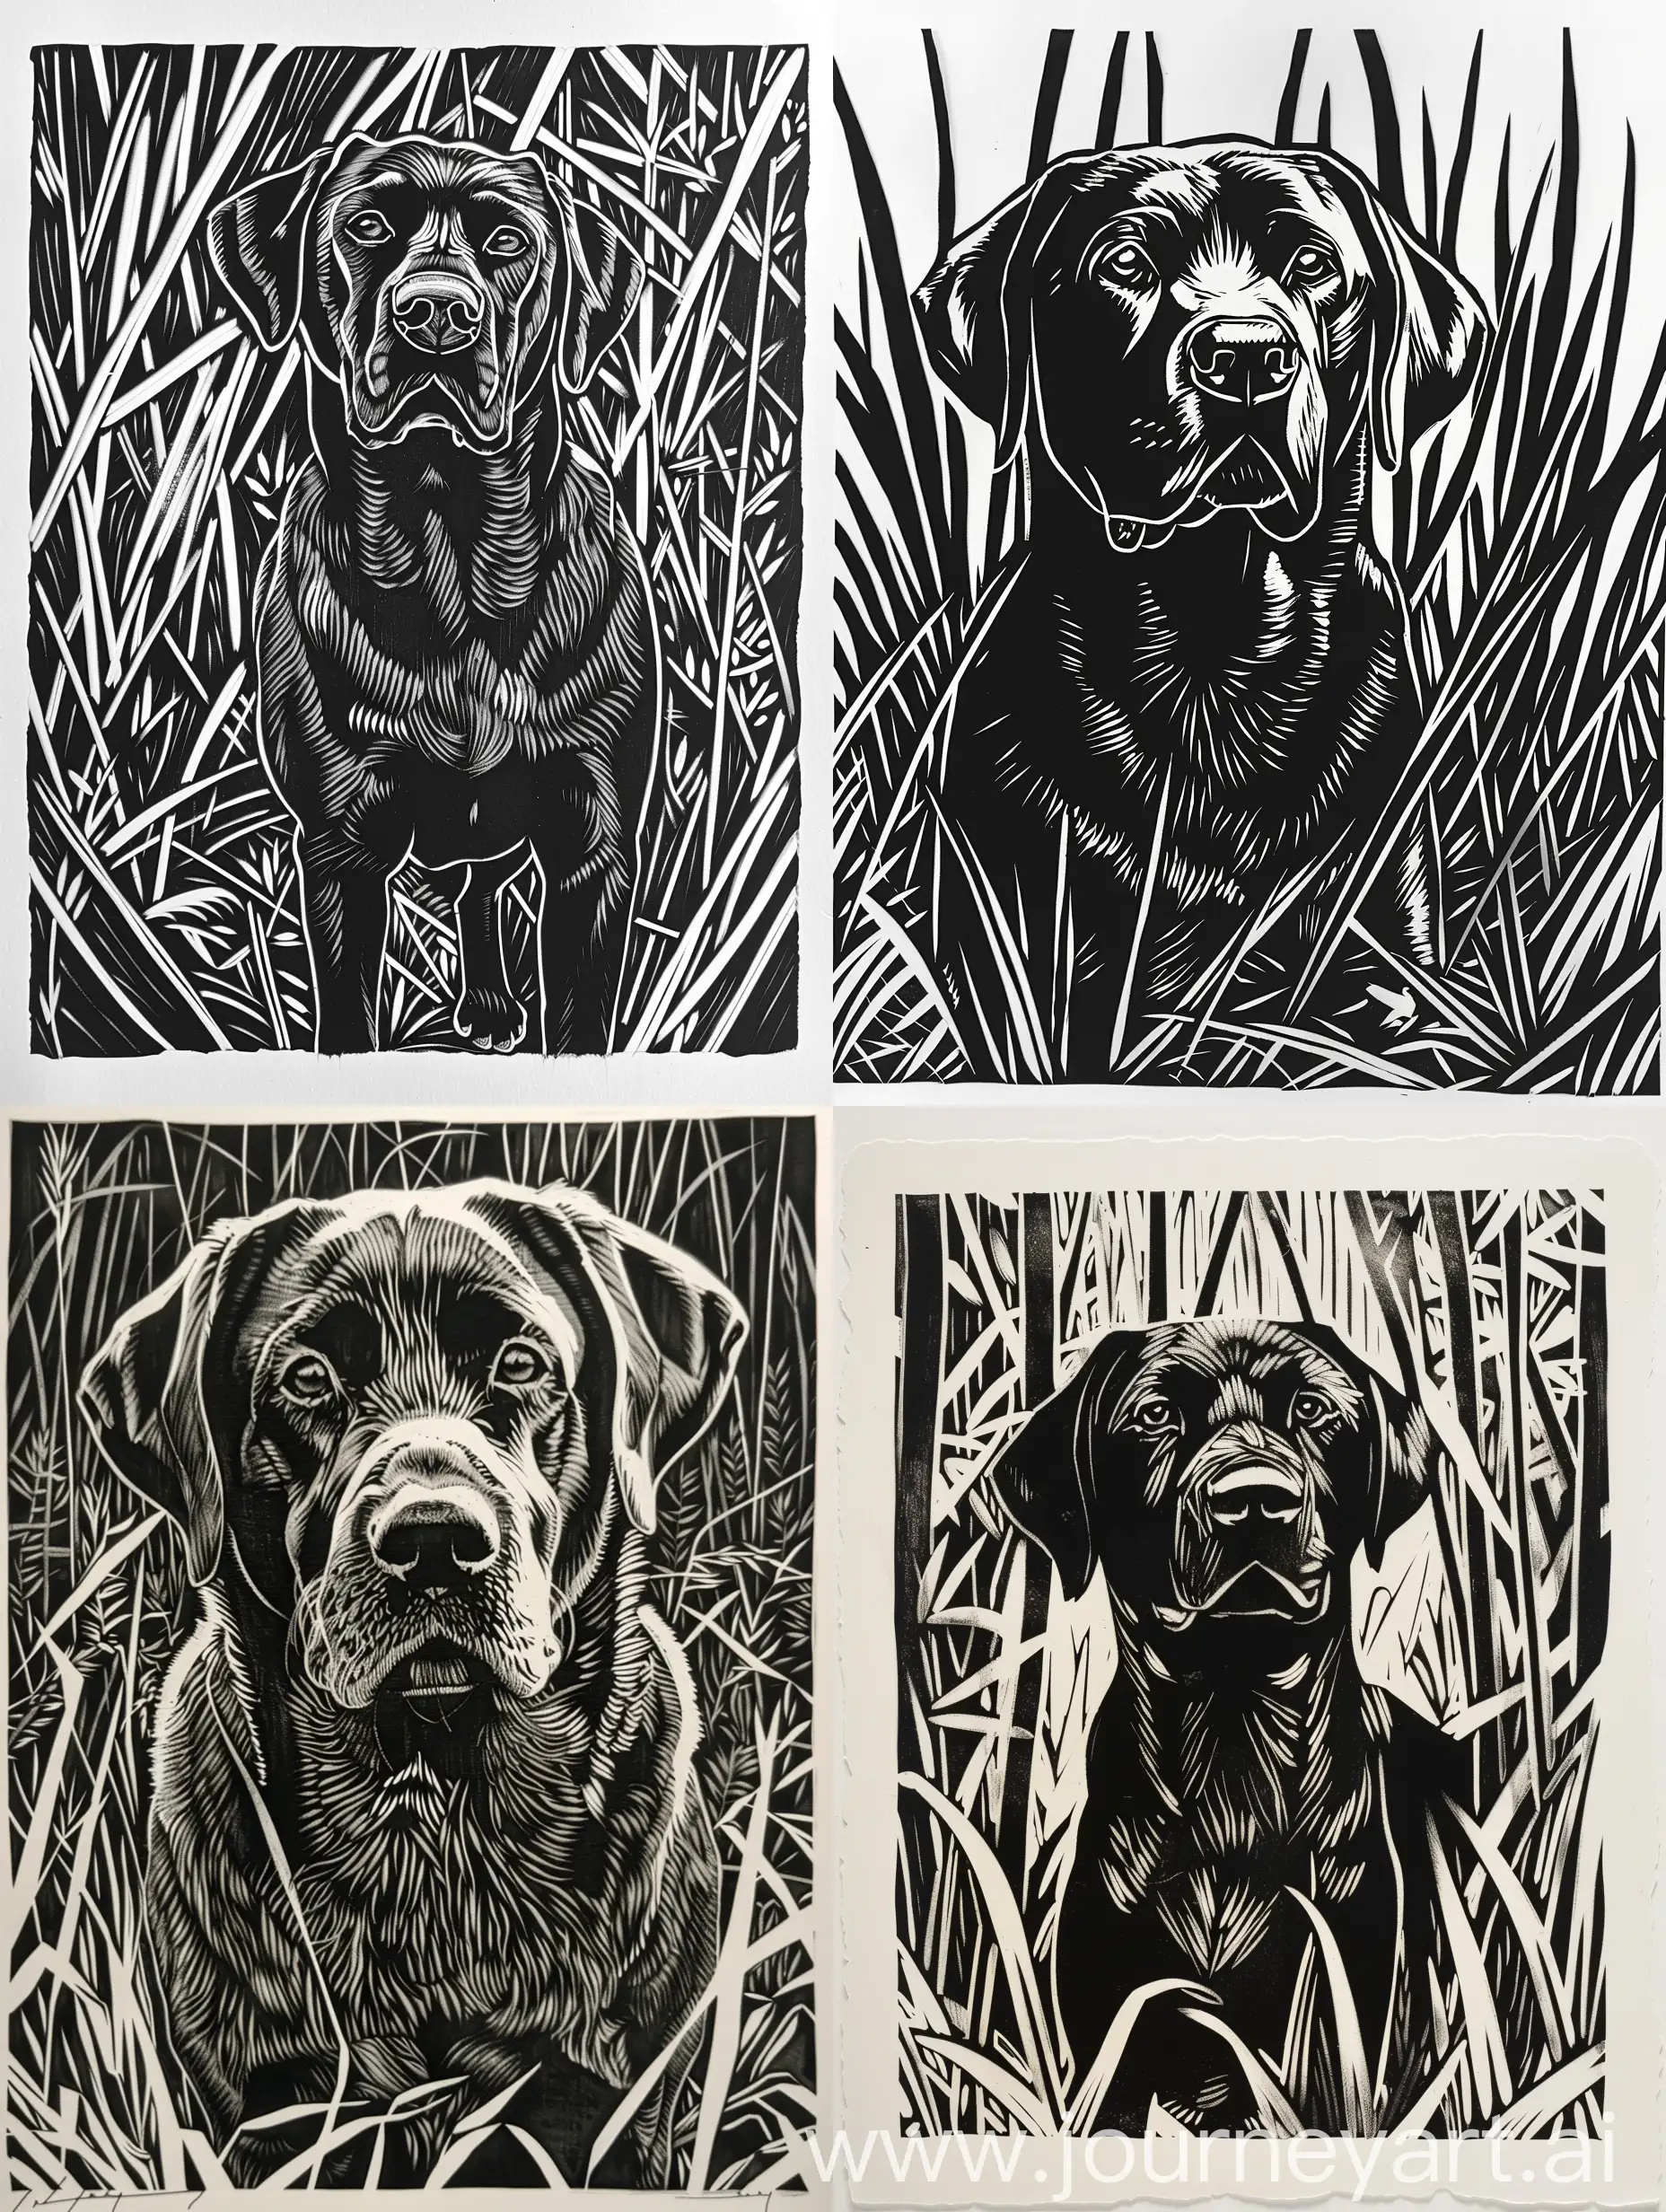 A set of black and white woodcut prints with a Labrador dog as the theme, with a background filled with layered vegetation. Each work employs various knife techniques, showcasing clear and harmonious visual processing intentions, bringing unique visual enjoyment.